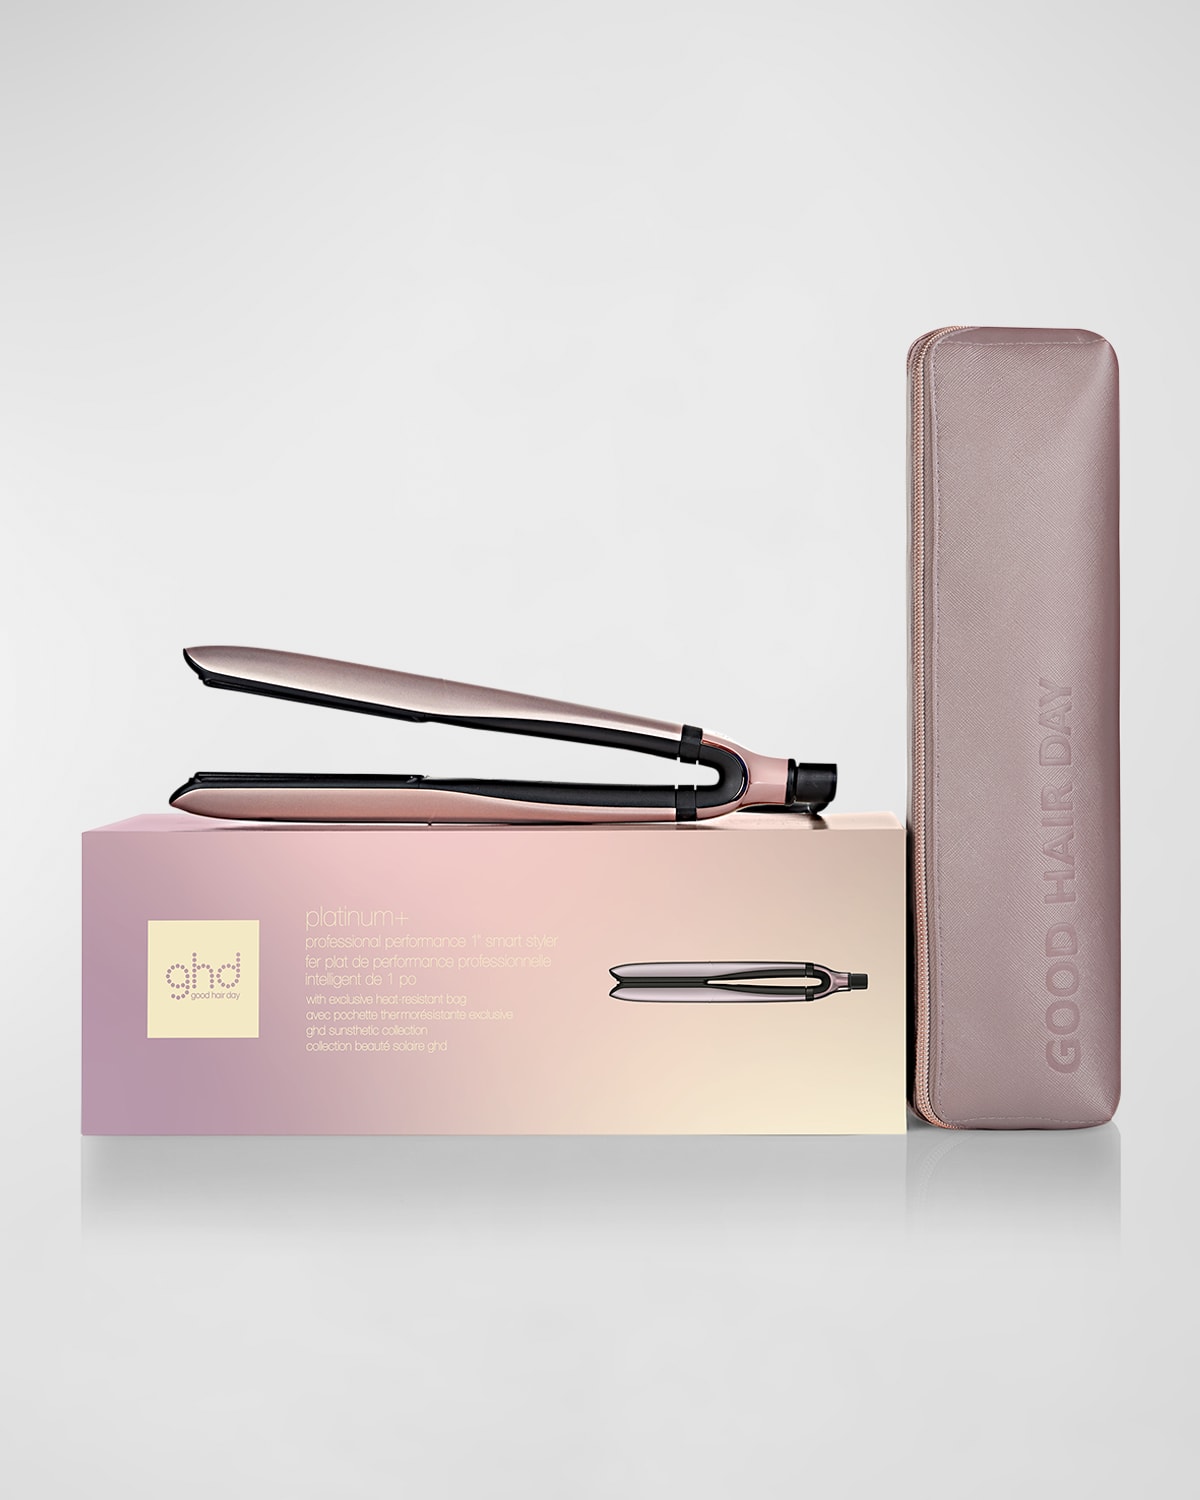 Platinum+ Styler, 1" Flat Iron, Limited Edition Hair Straightener in Sun-Kissed Taupe